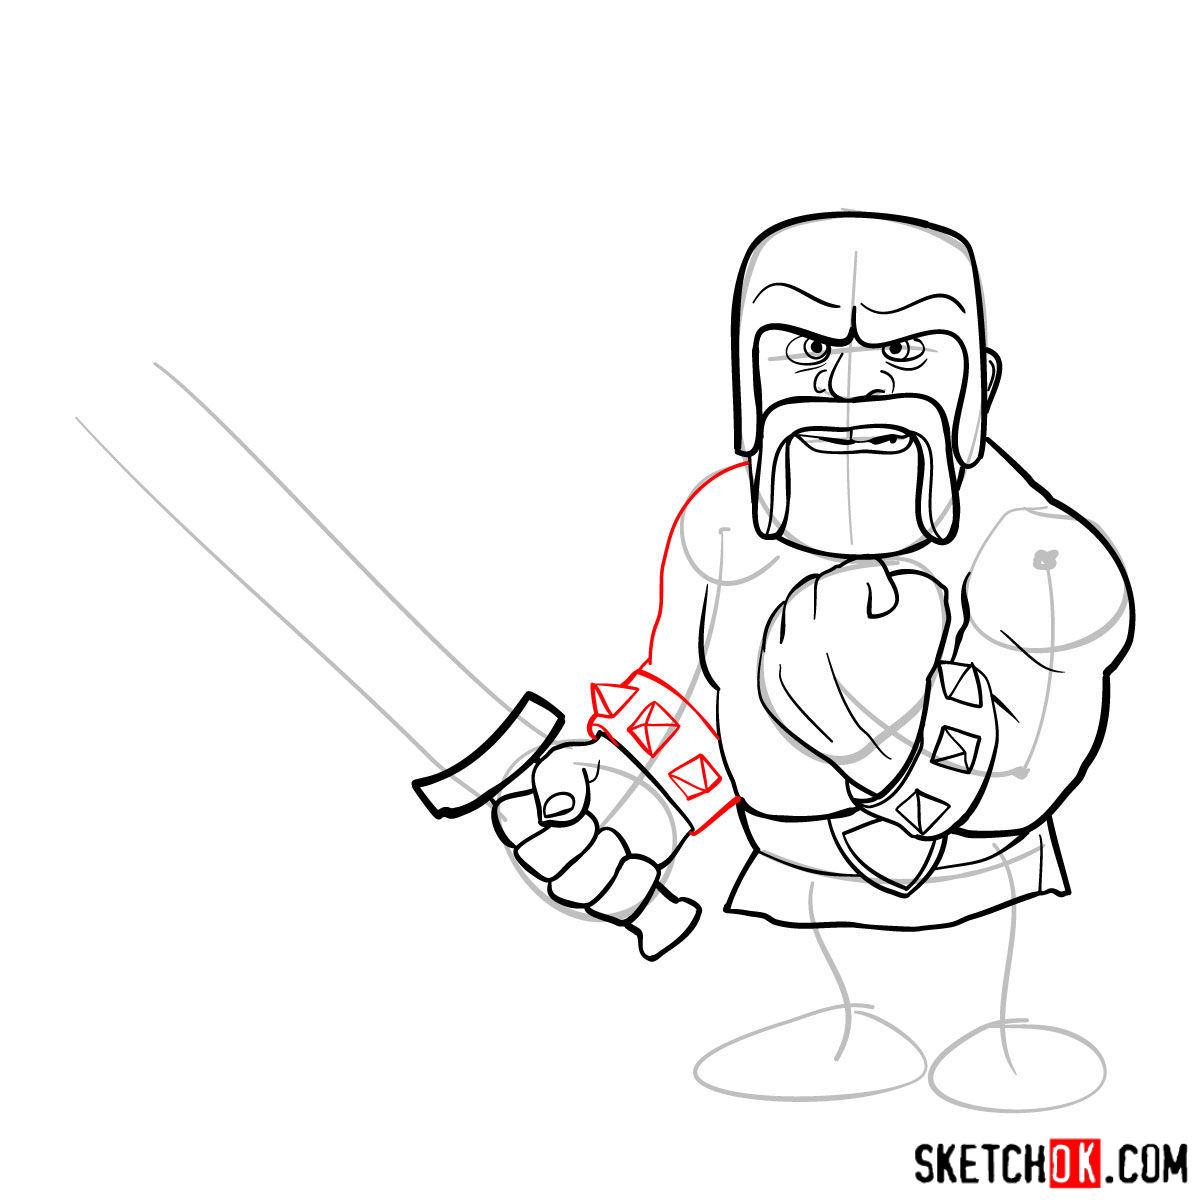 How to draw Barbarian from Clash of Clans - step 09